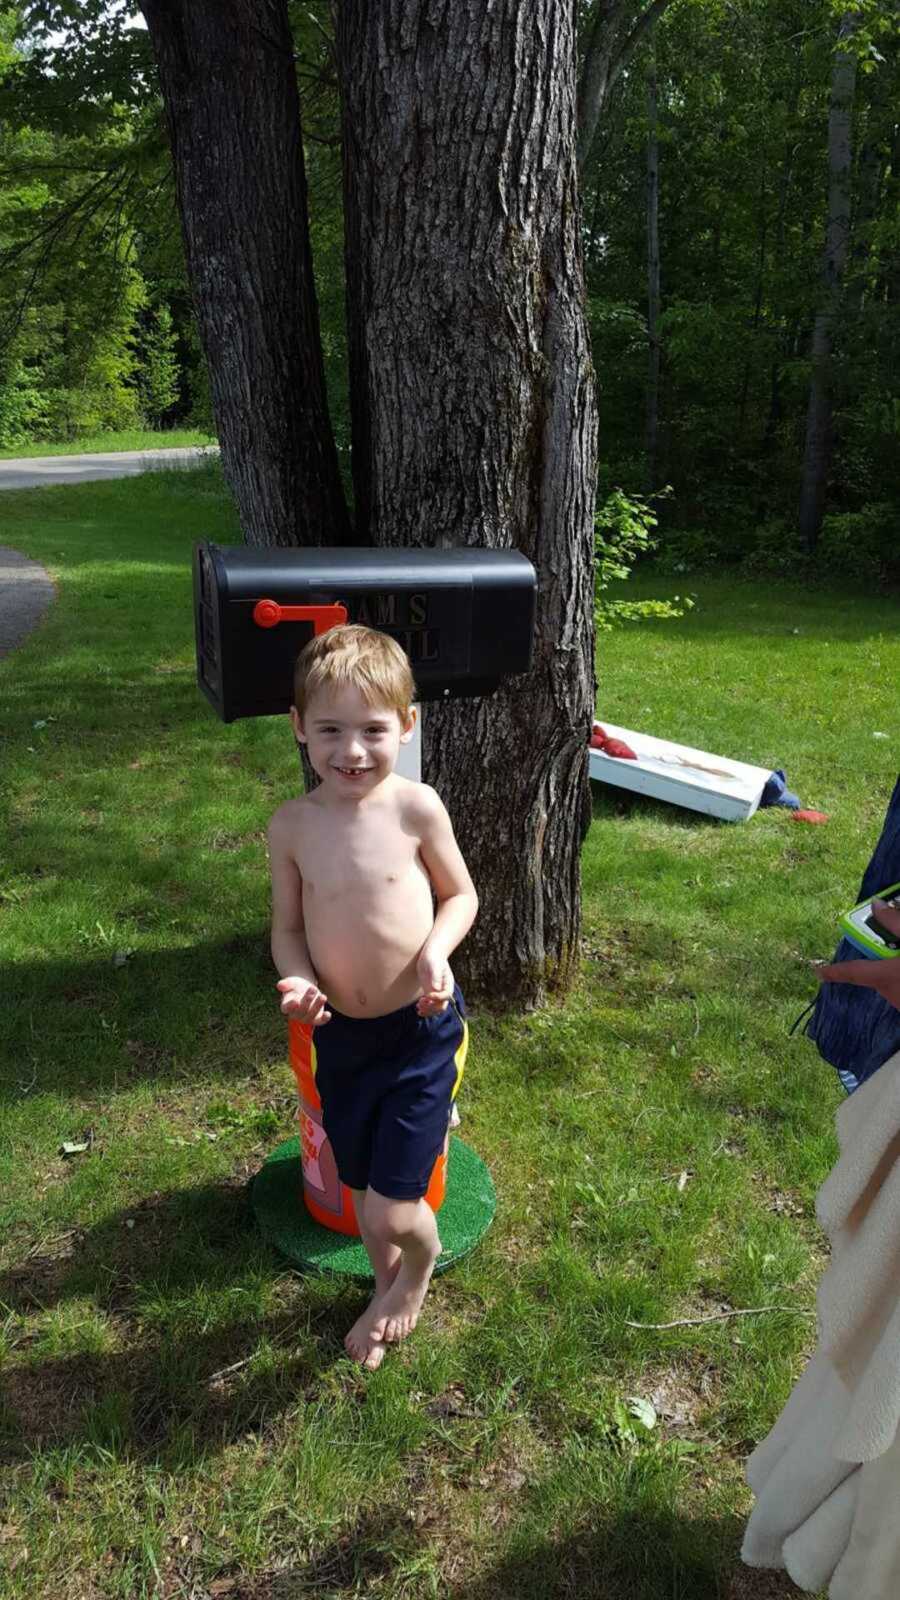 boy with autism stands shirtless in front of mailbox made by Home Depot employees